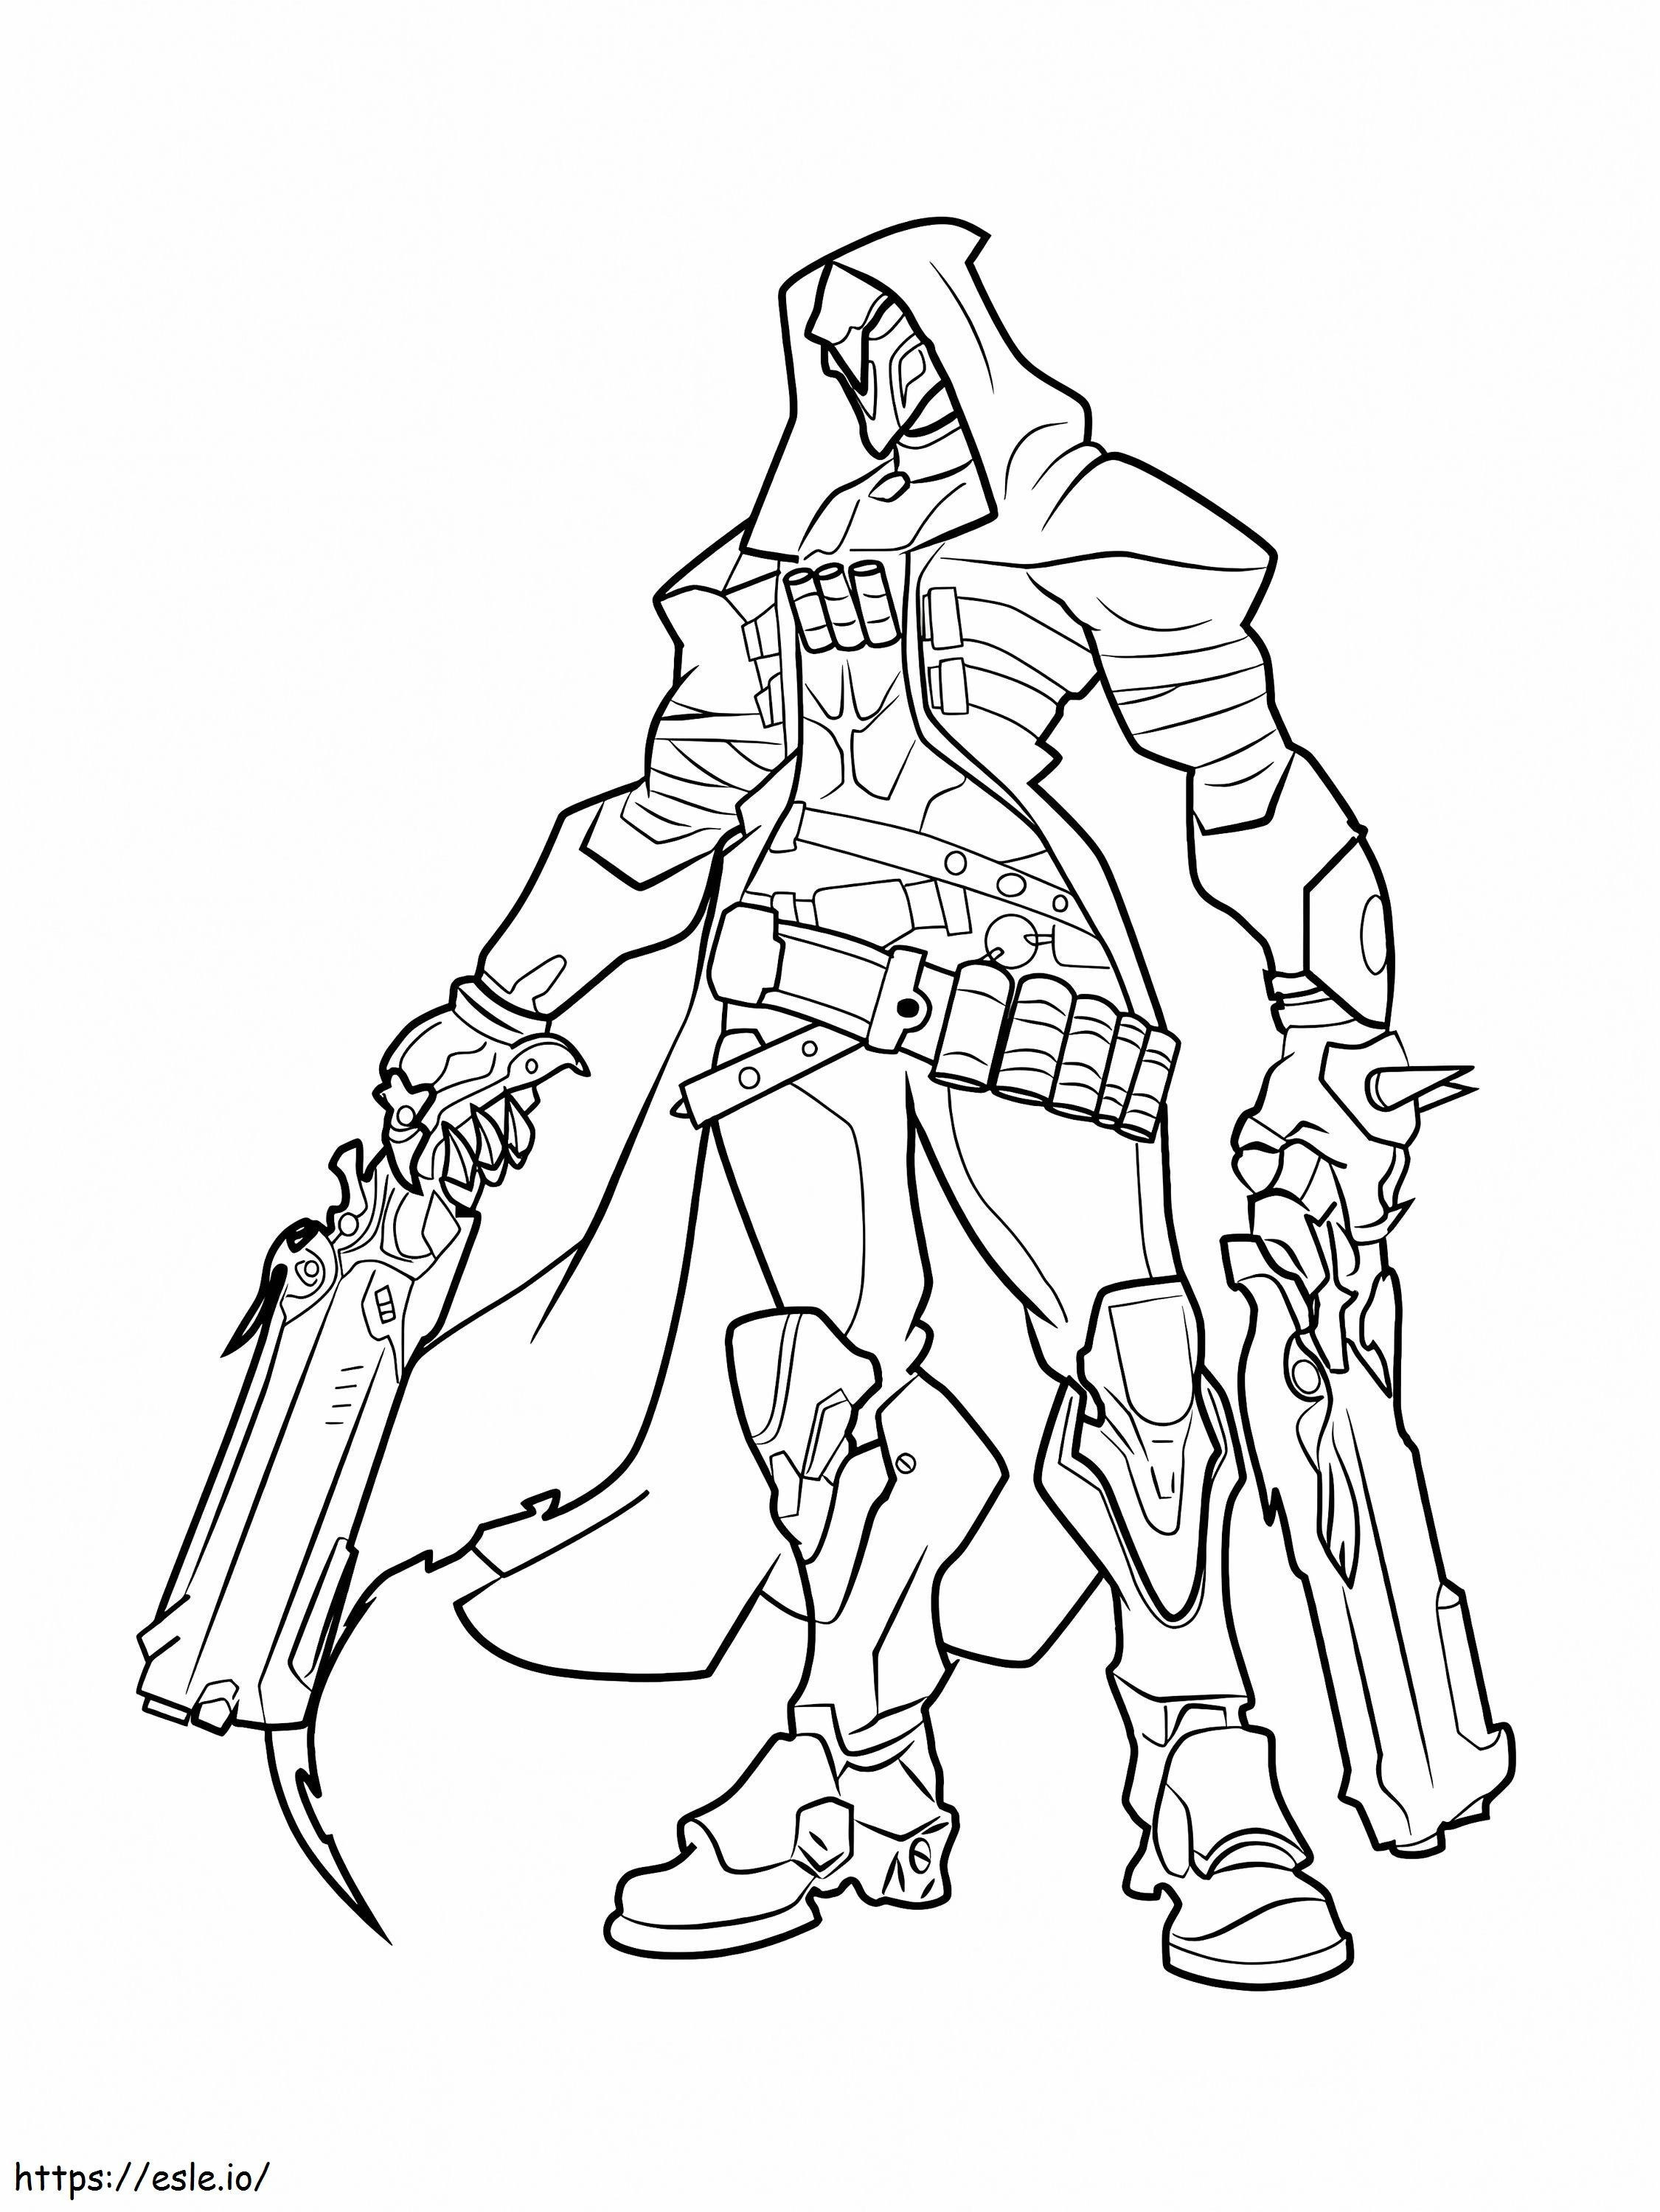 1595467195 Overwatch 027 coloring page